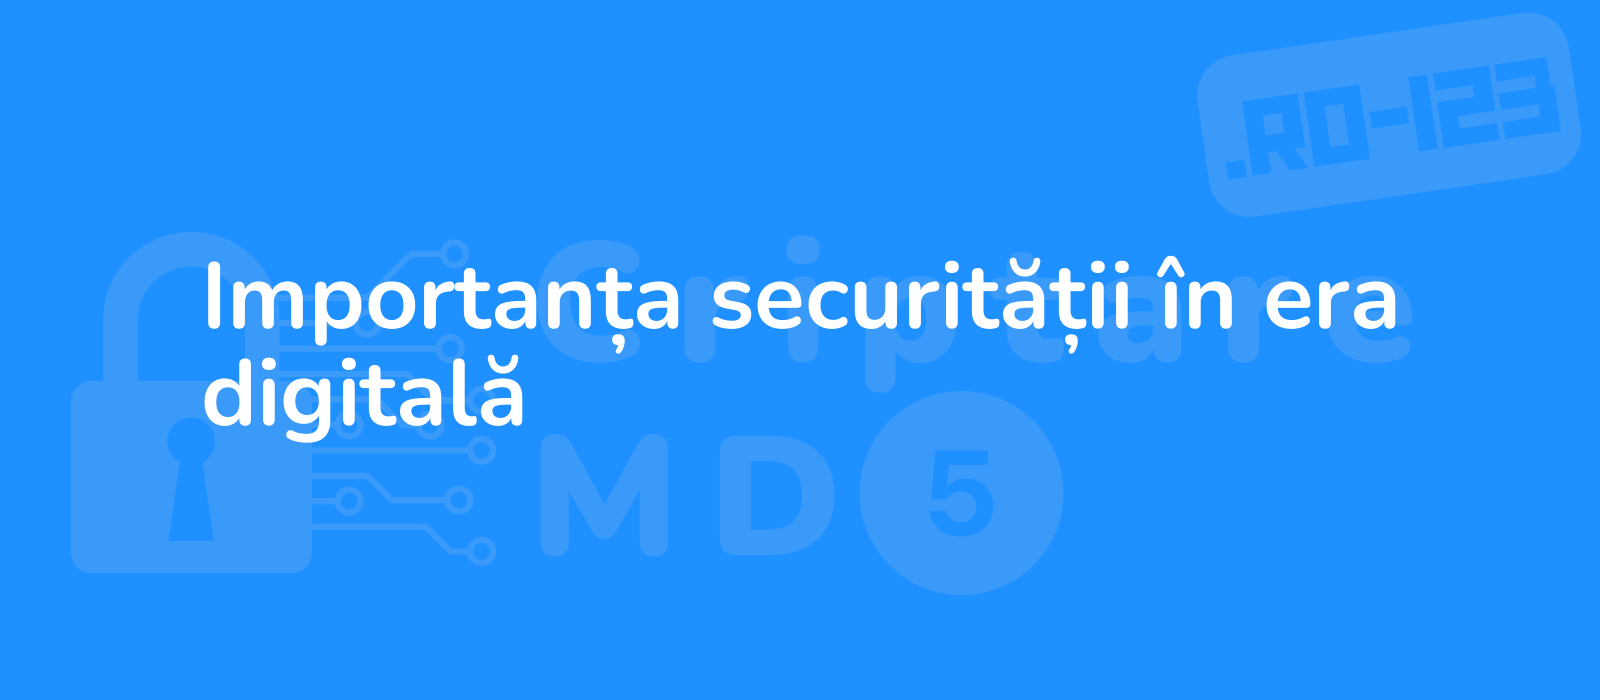 the description for the representative image of the title importanta securitatii in era digitala could be illustration of a shield protecting digital devices symbolizing the importance of security in the digital era 12 words